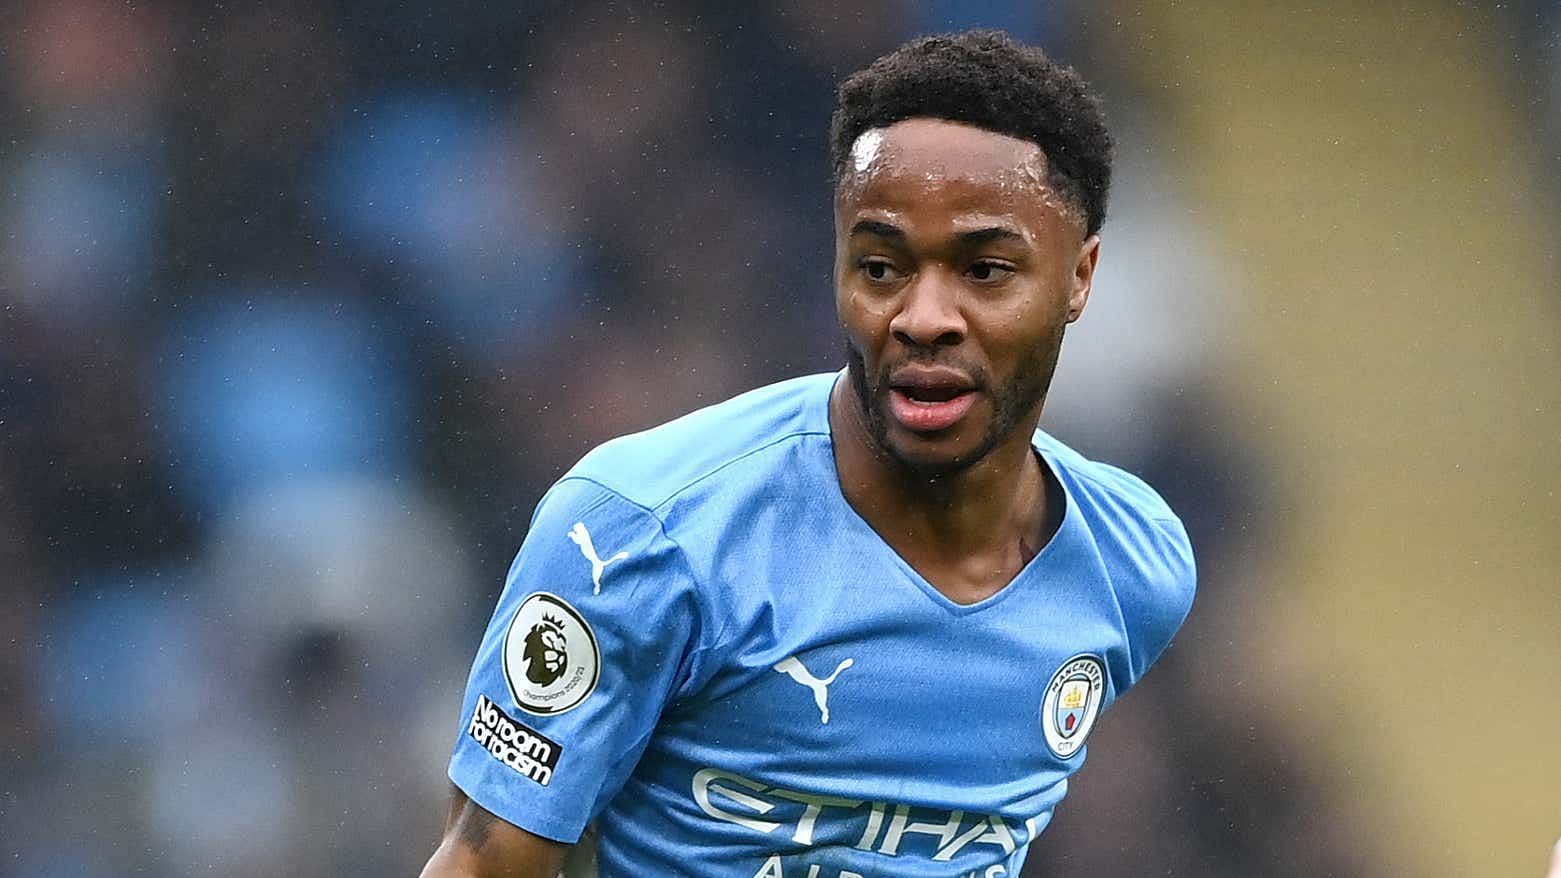 Raheem Sterling registered a couple of assists in an impressive performance